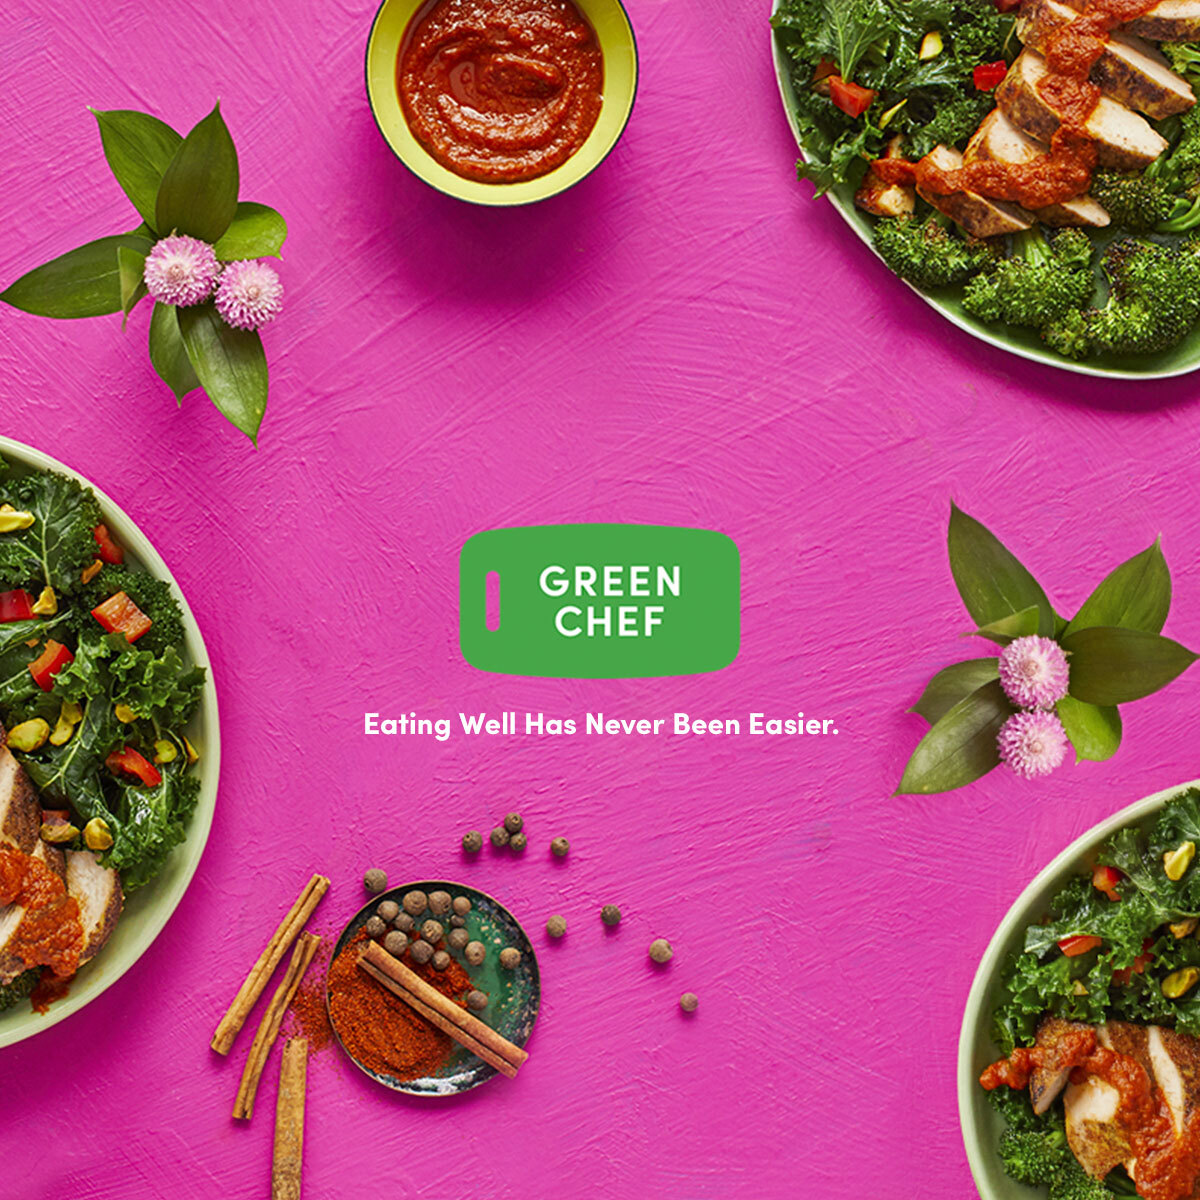 Green Chef Review 2022: A Great Meal Kit to Get Out of a Cooking